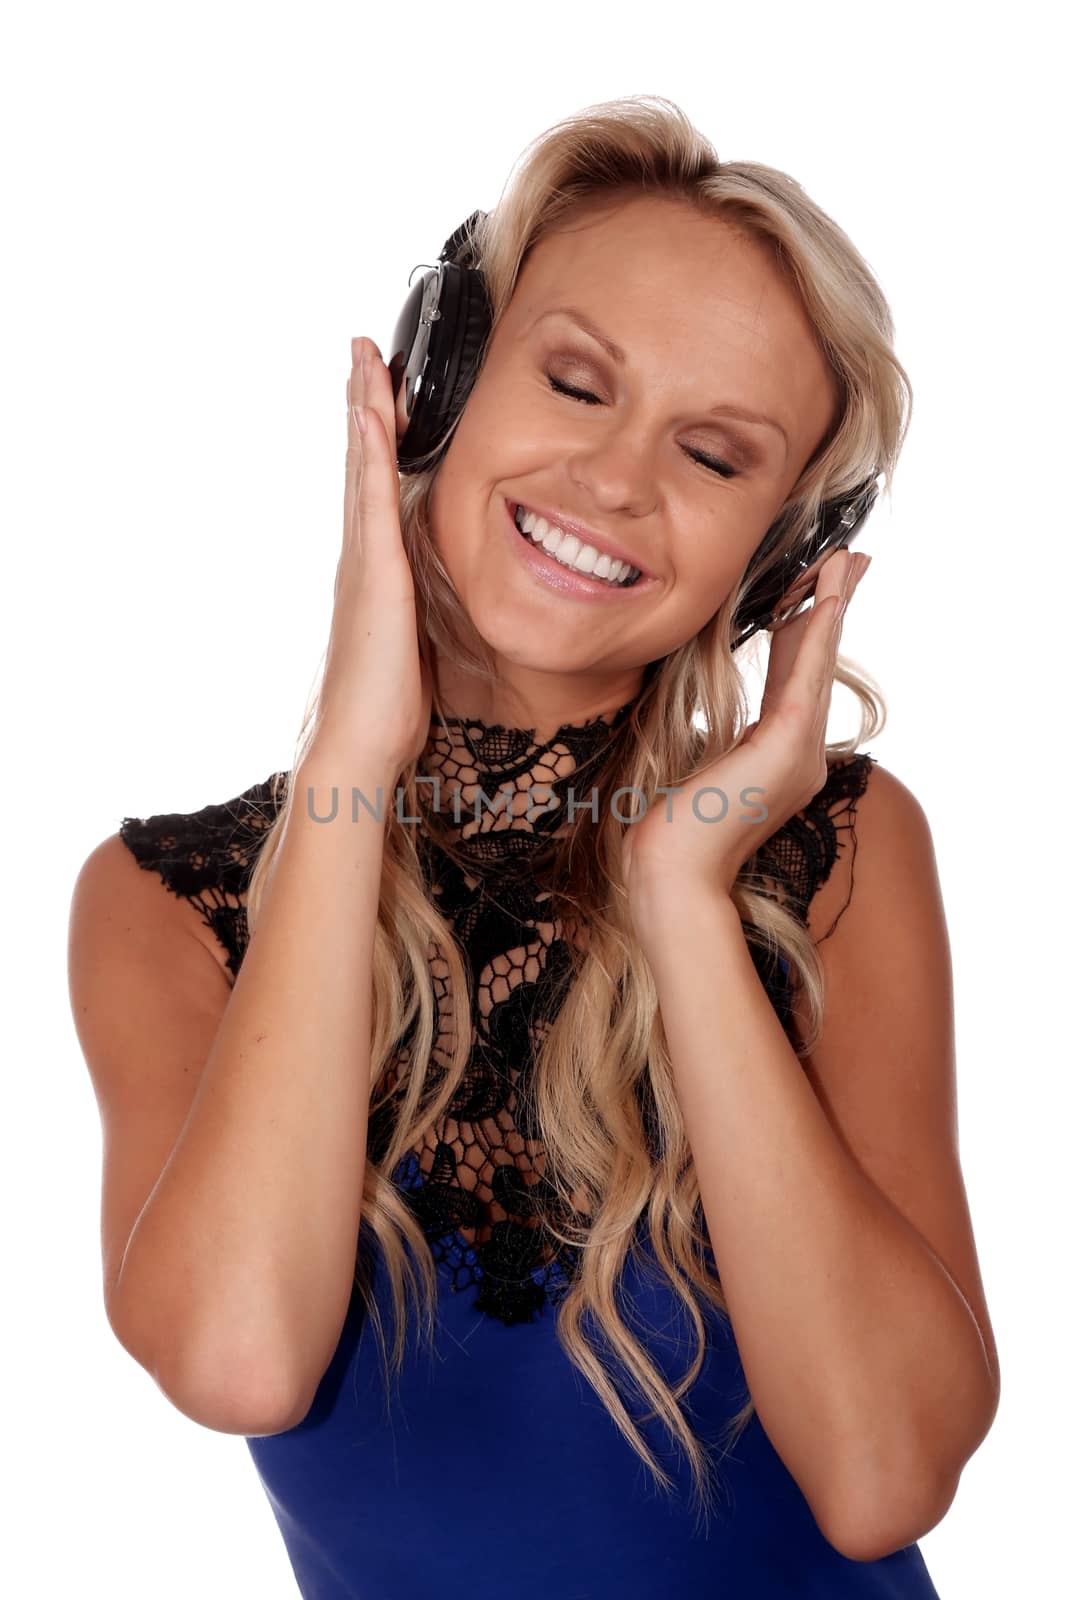 Pretty blond lady listening to music on her earphones